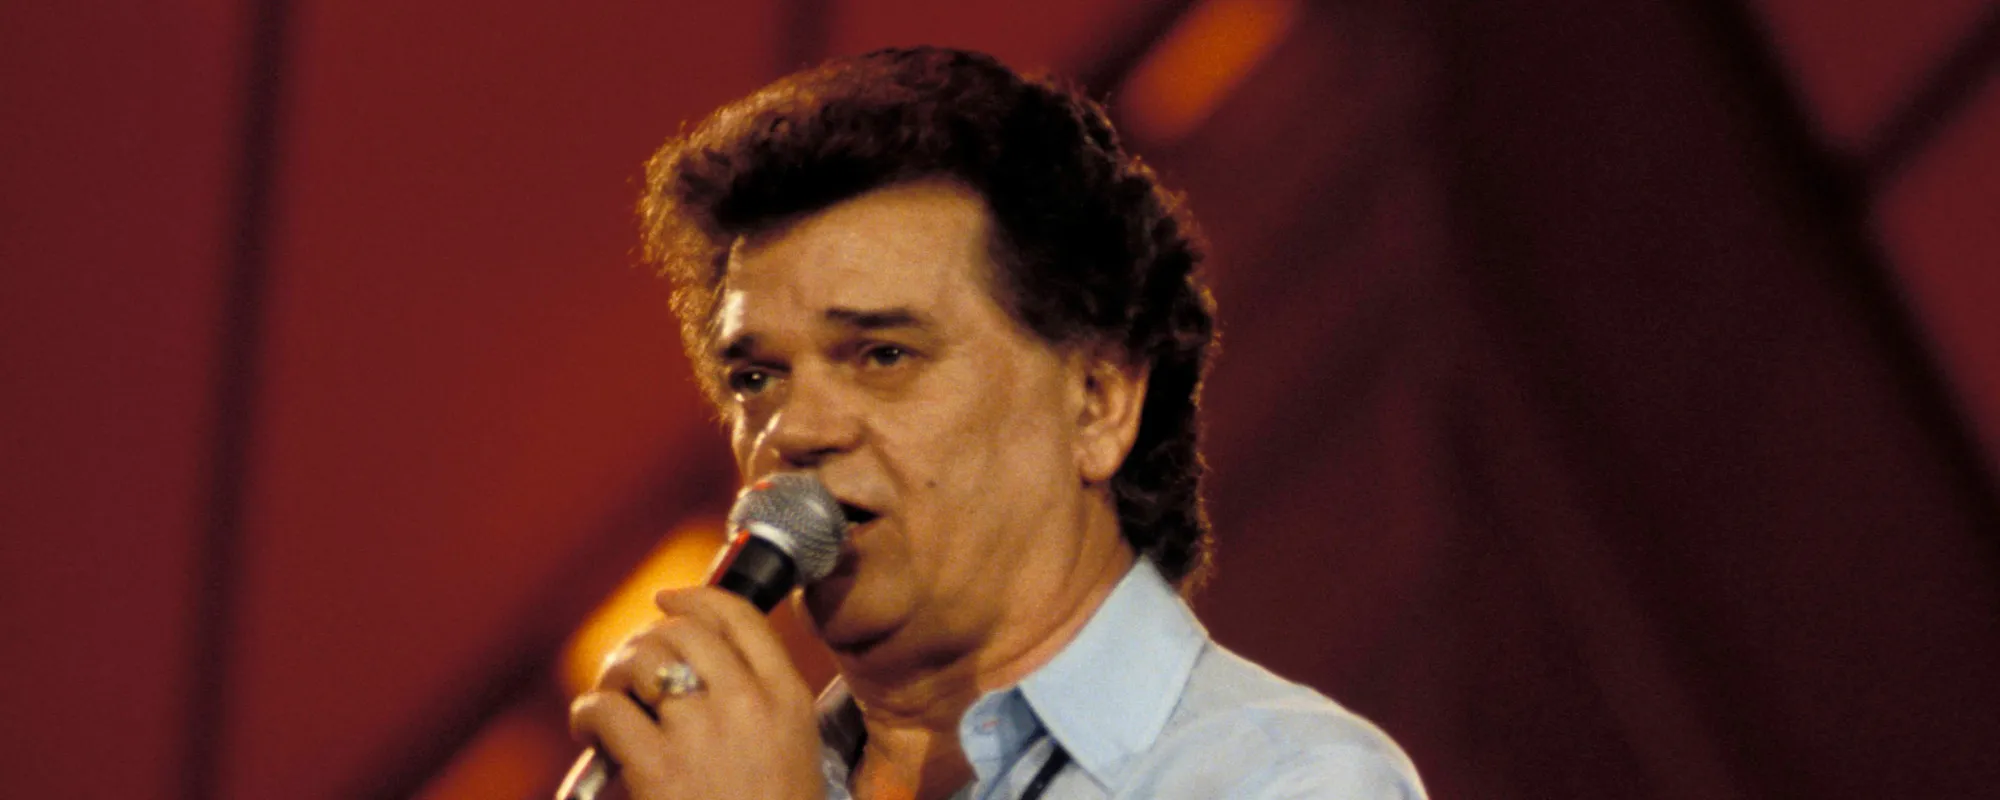 Top 10 Conway Twitty Songs